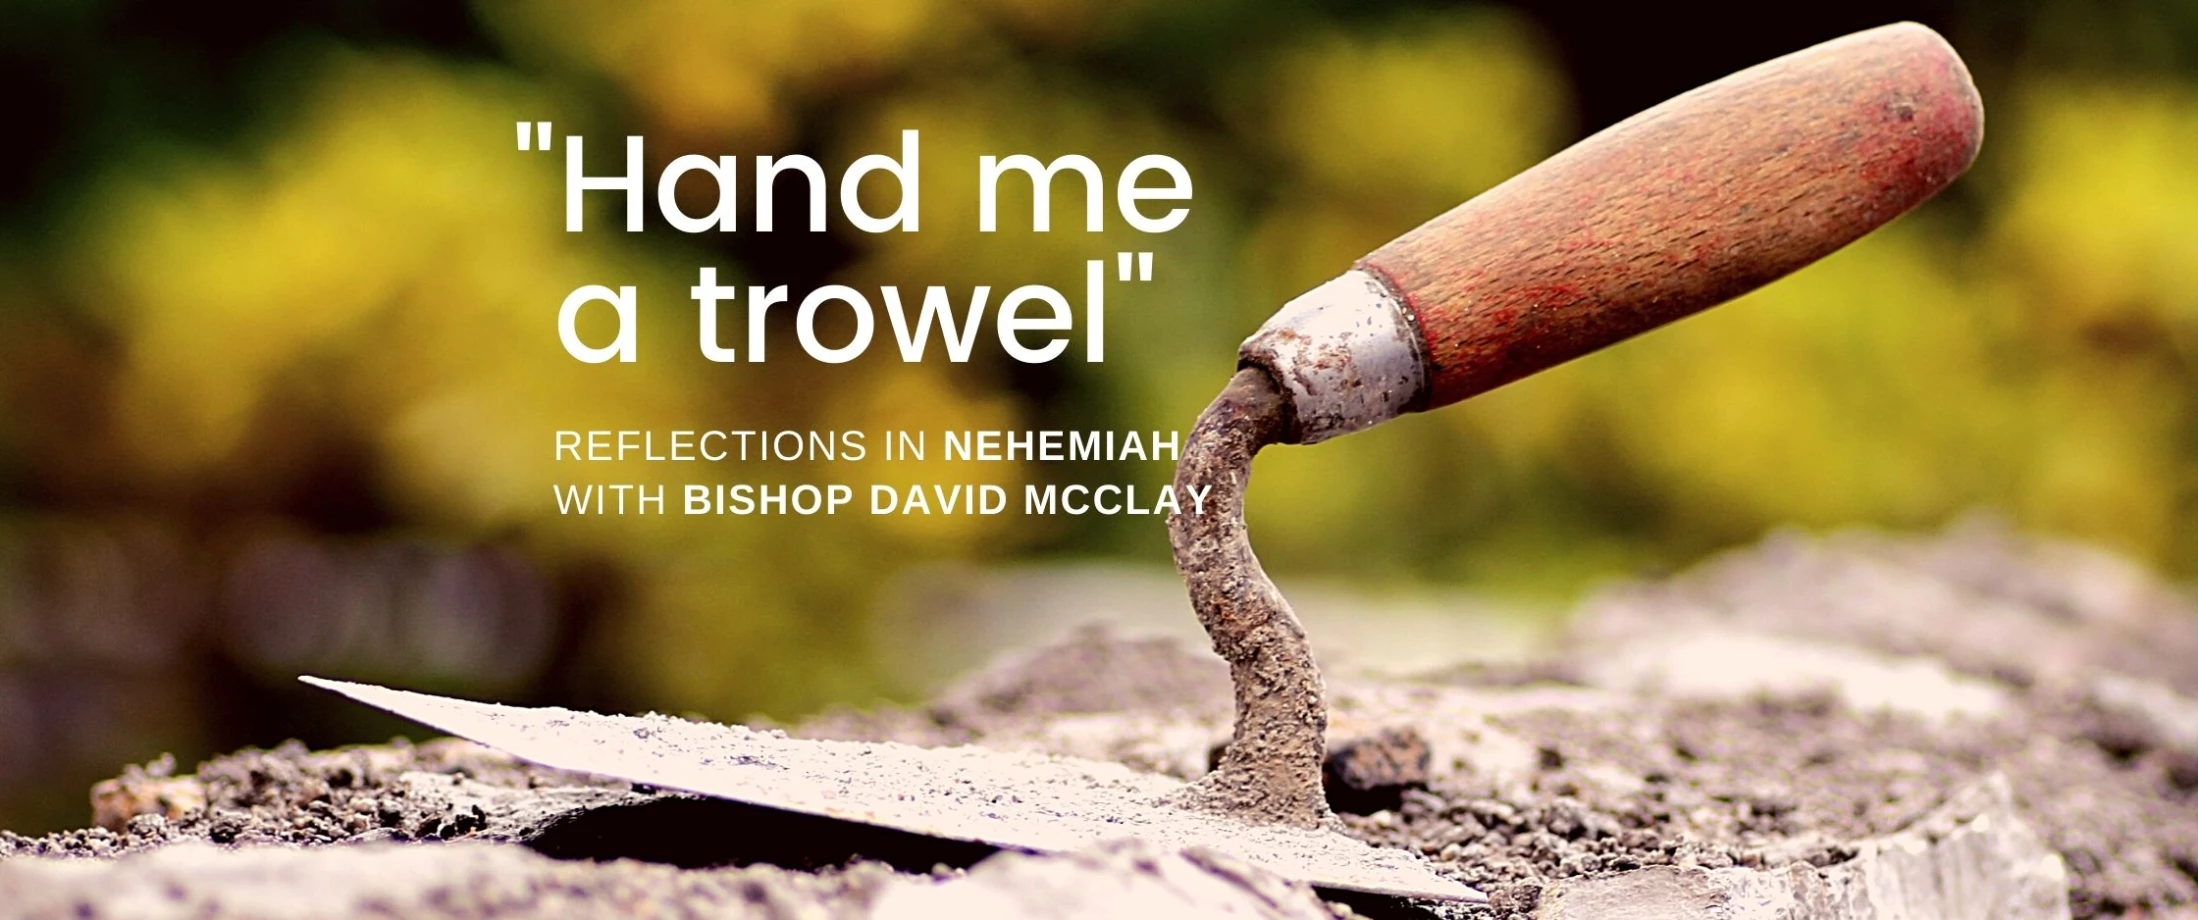 Reflections in Nehemiah for Lent Day 31